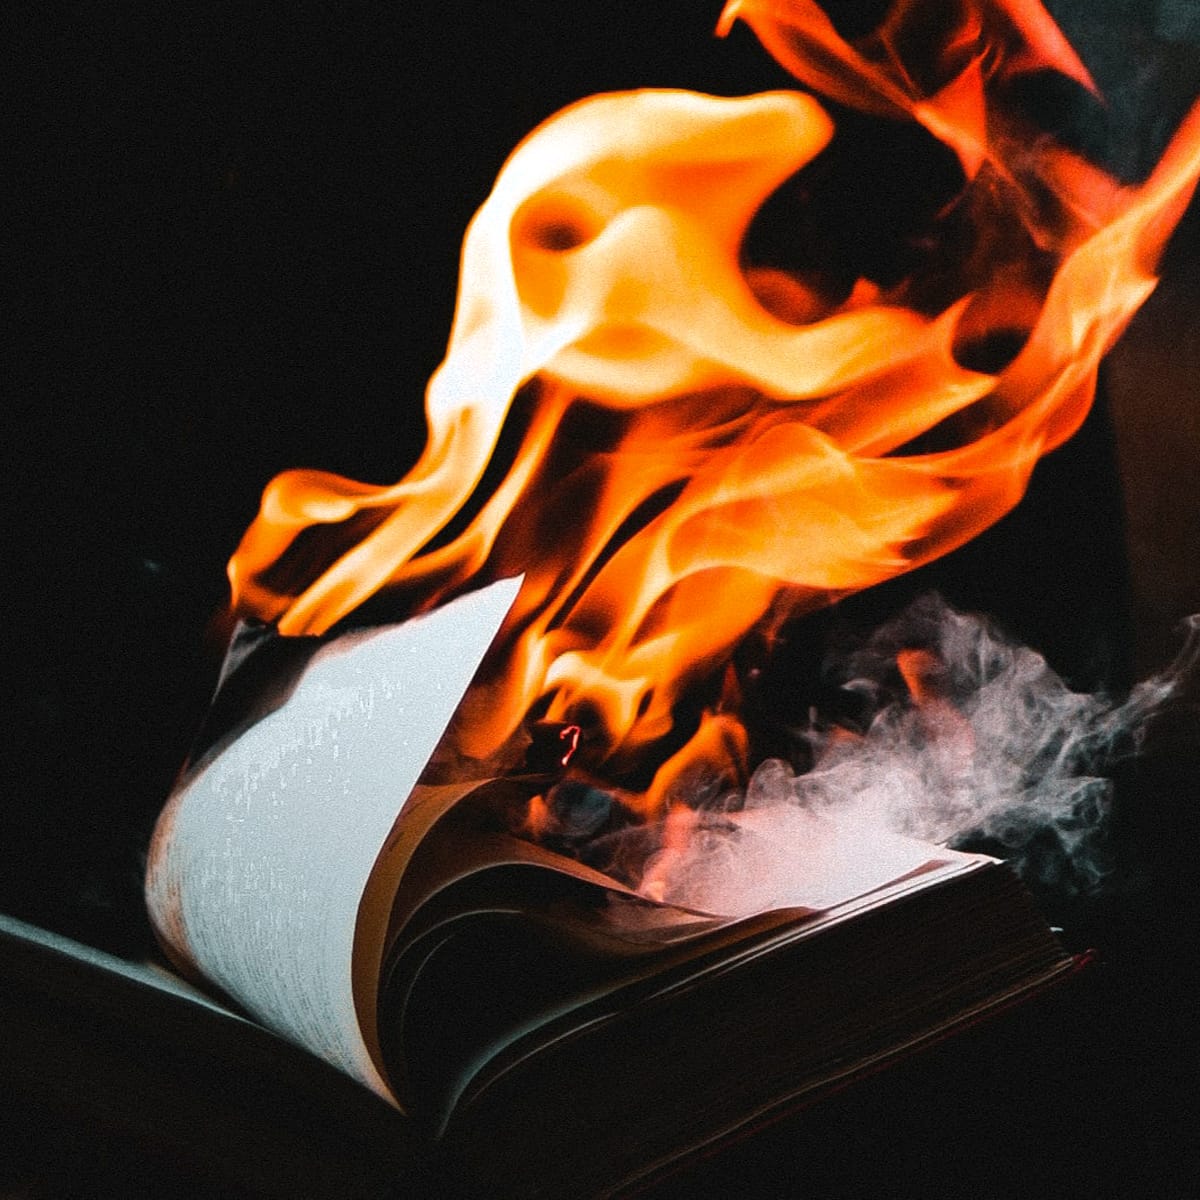 Here's a timeline of book banning and burning.